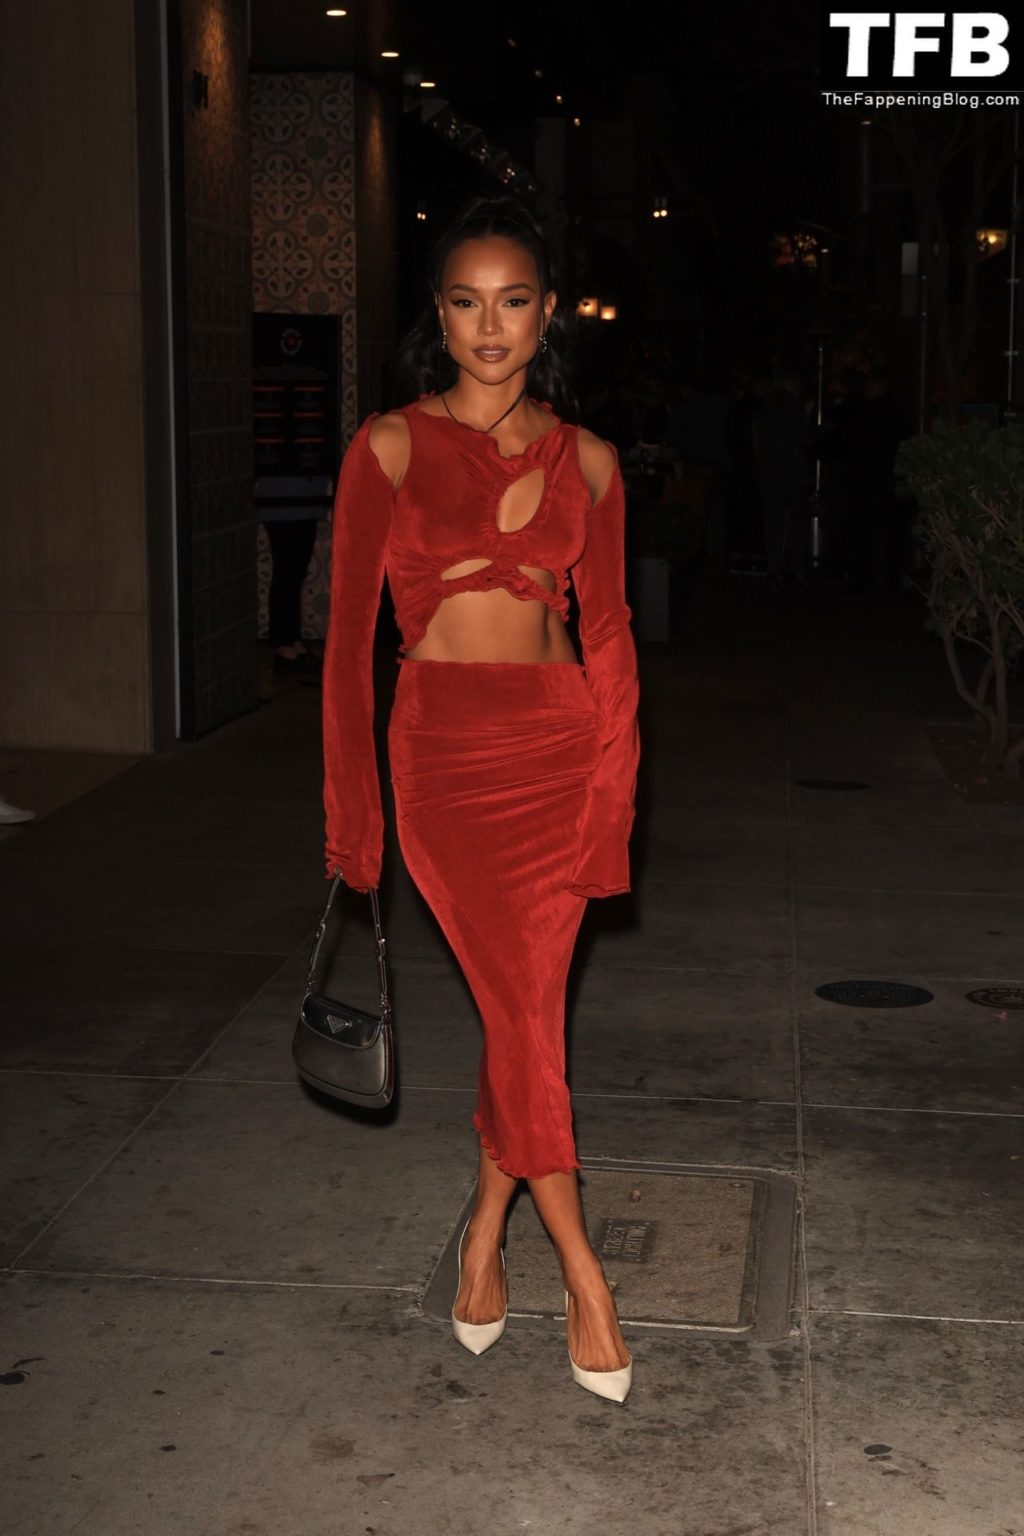 Karrueche Tran Sexy The Fappening Blog 17 1 1024x1536 - Karrueche Tran Shows Her Pokies in a Red Dress at The Hollywood Reporter’s Oscar Nominees Night (68 Photos)